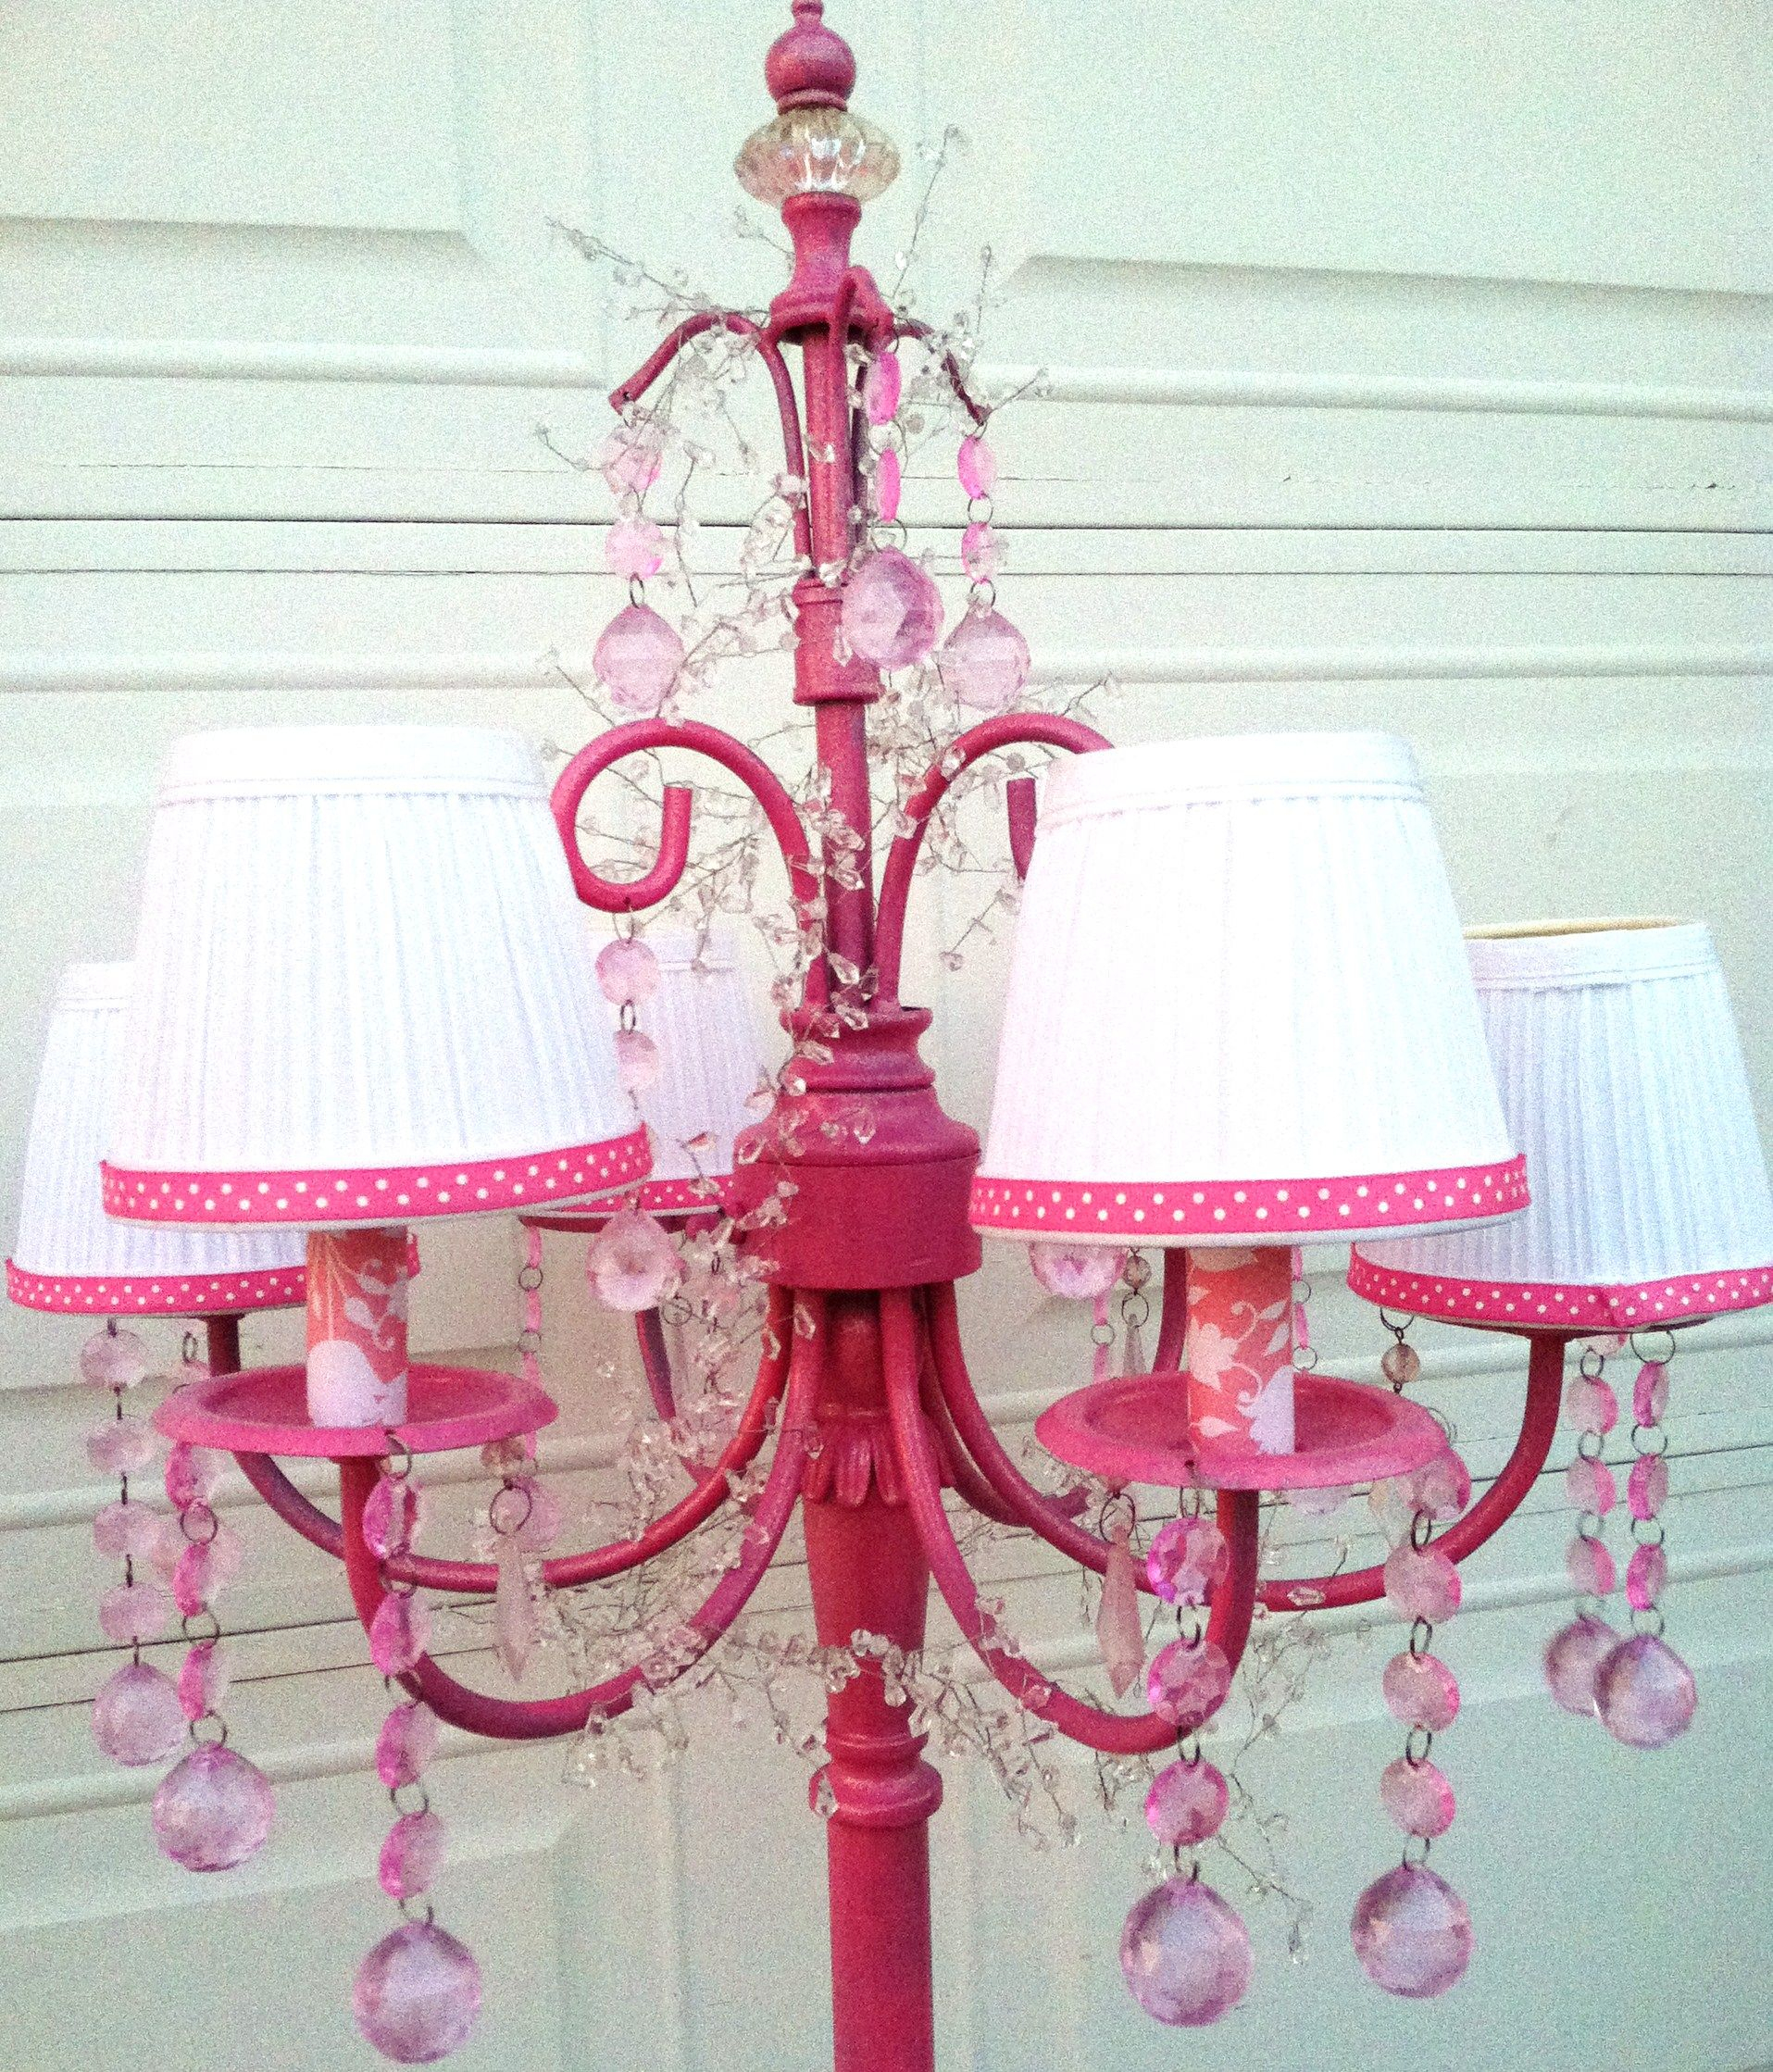 Girlie Floor Lamp Project For The Home Home Decor throughout sizing 1915 X 2238